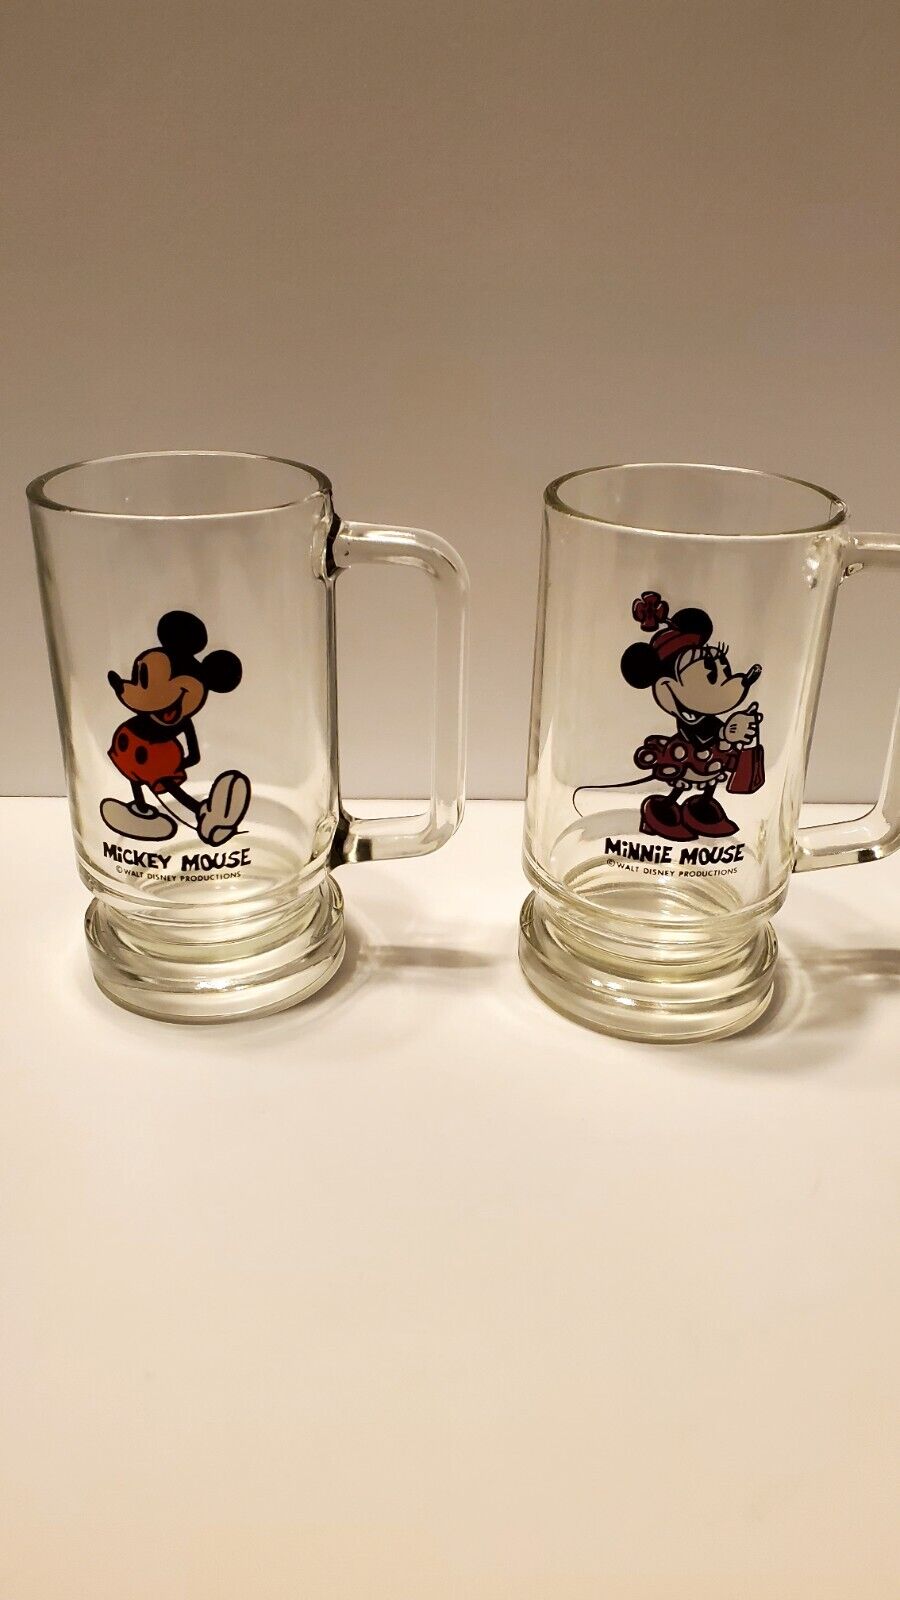 VINTAGE 1970s Walt Disney World Minnie And Mickey Mouse Glass Beer Mugs Cups